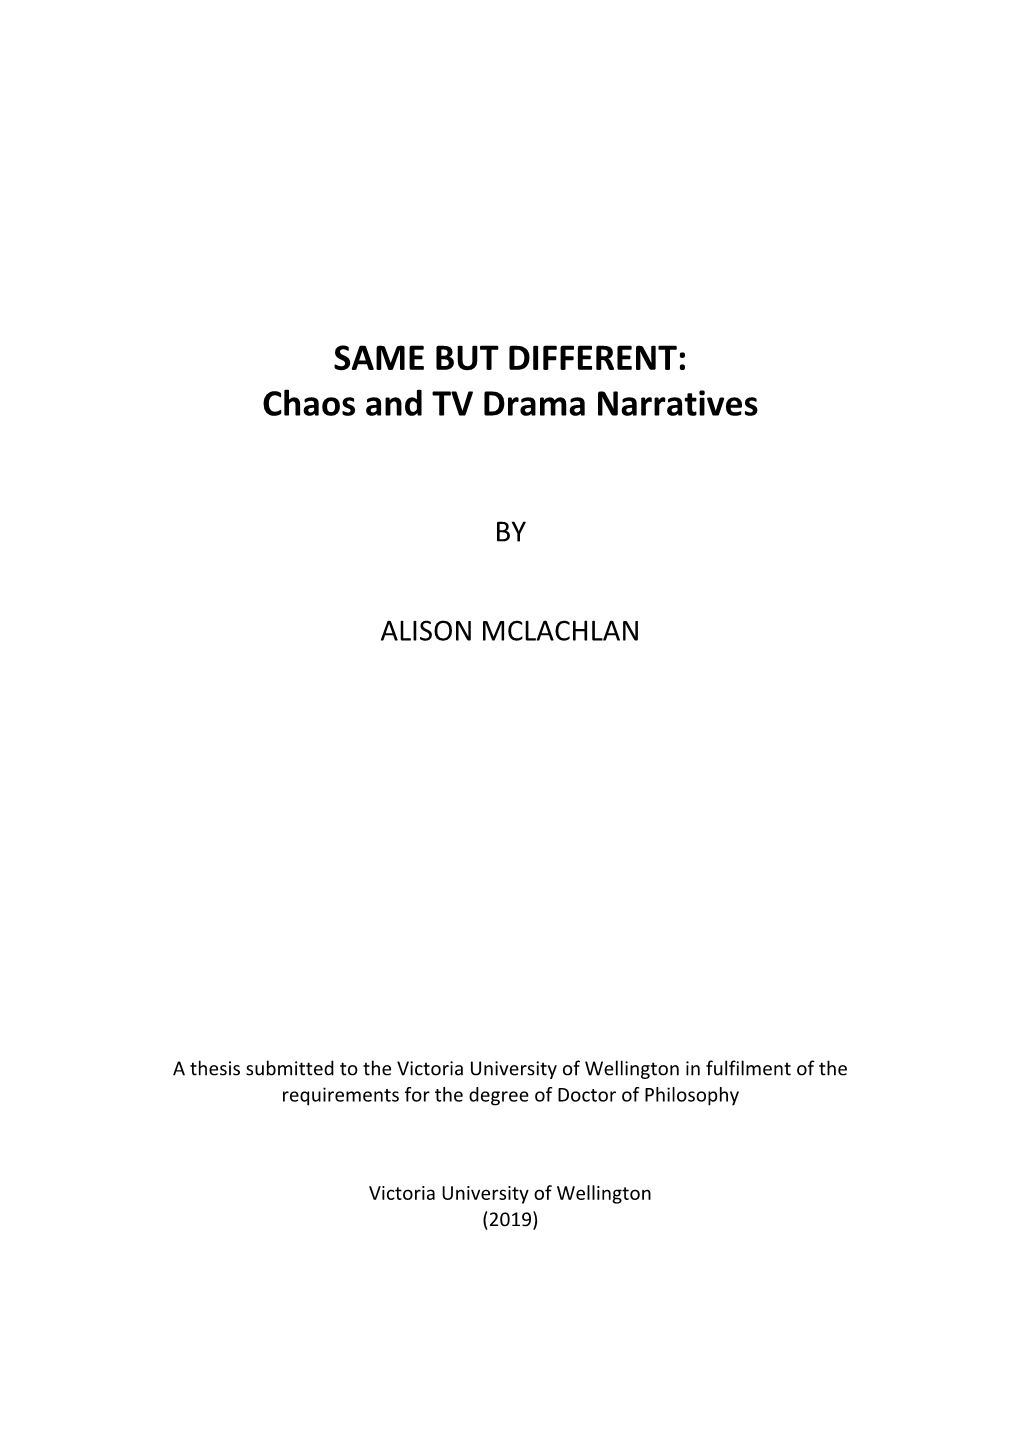 SAME but DIFFERENT: Chaos and TV Drama Narratives